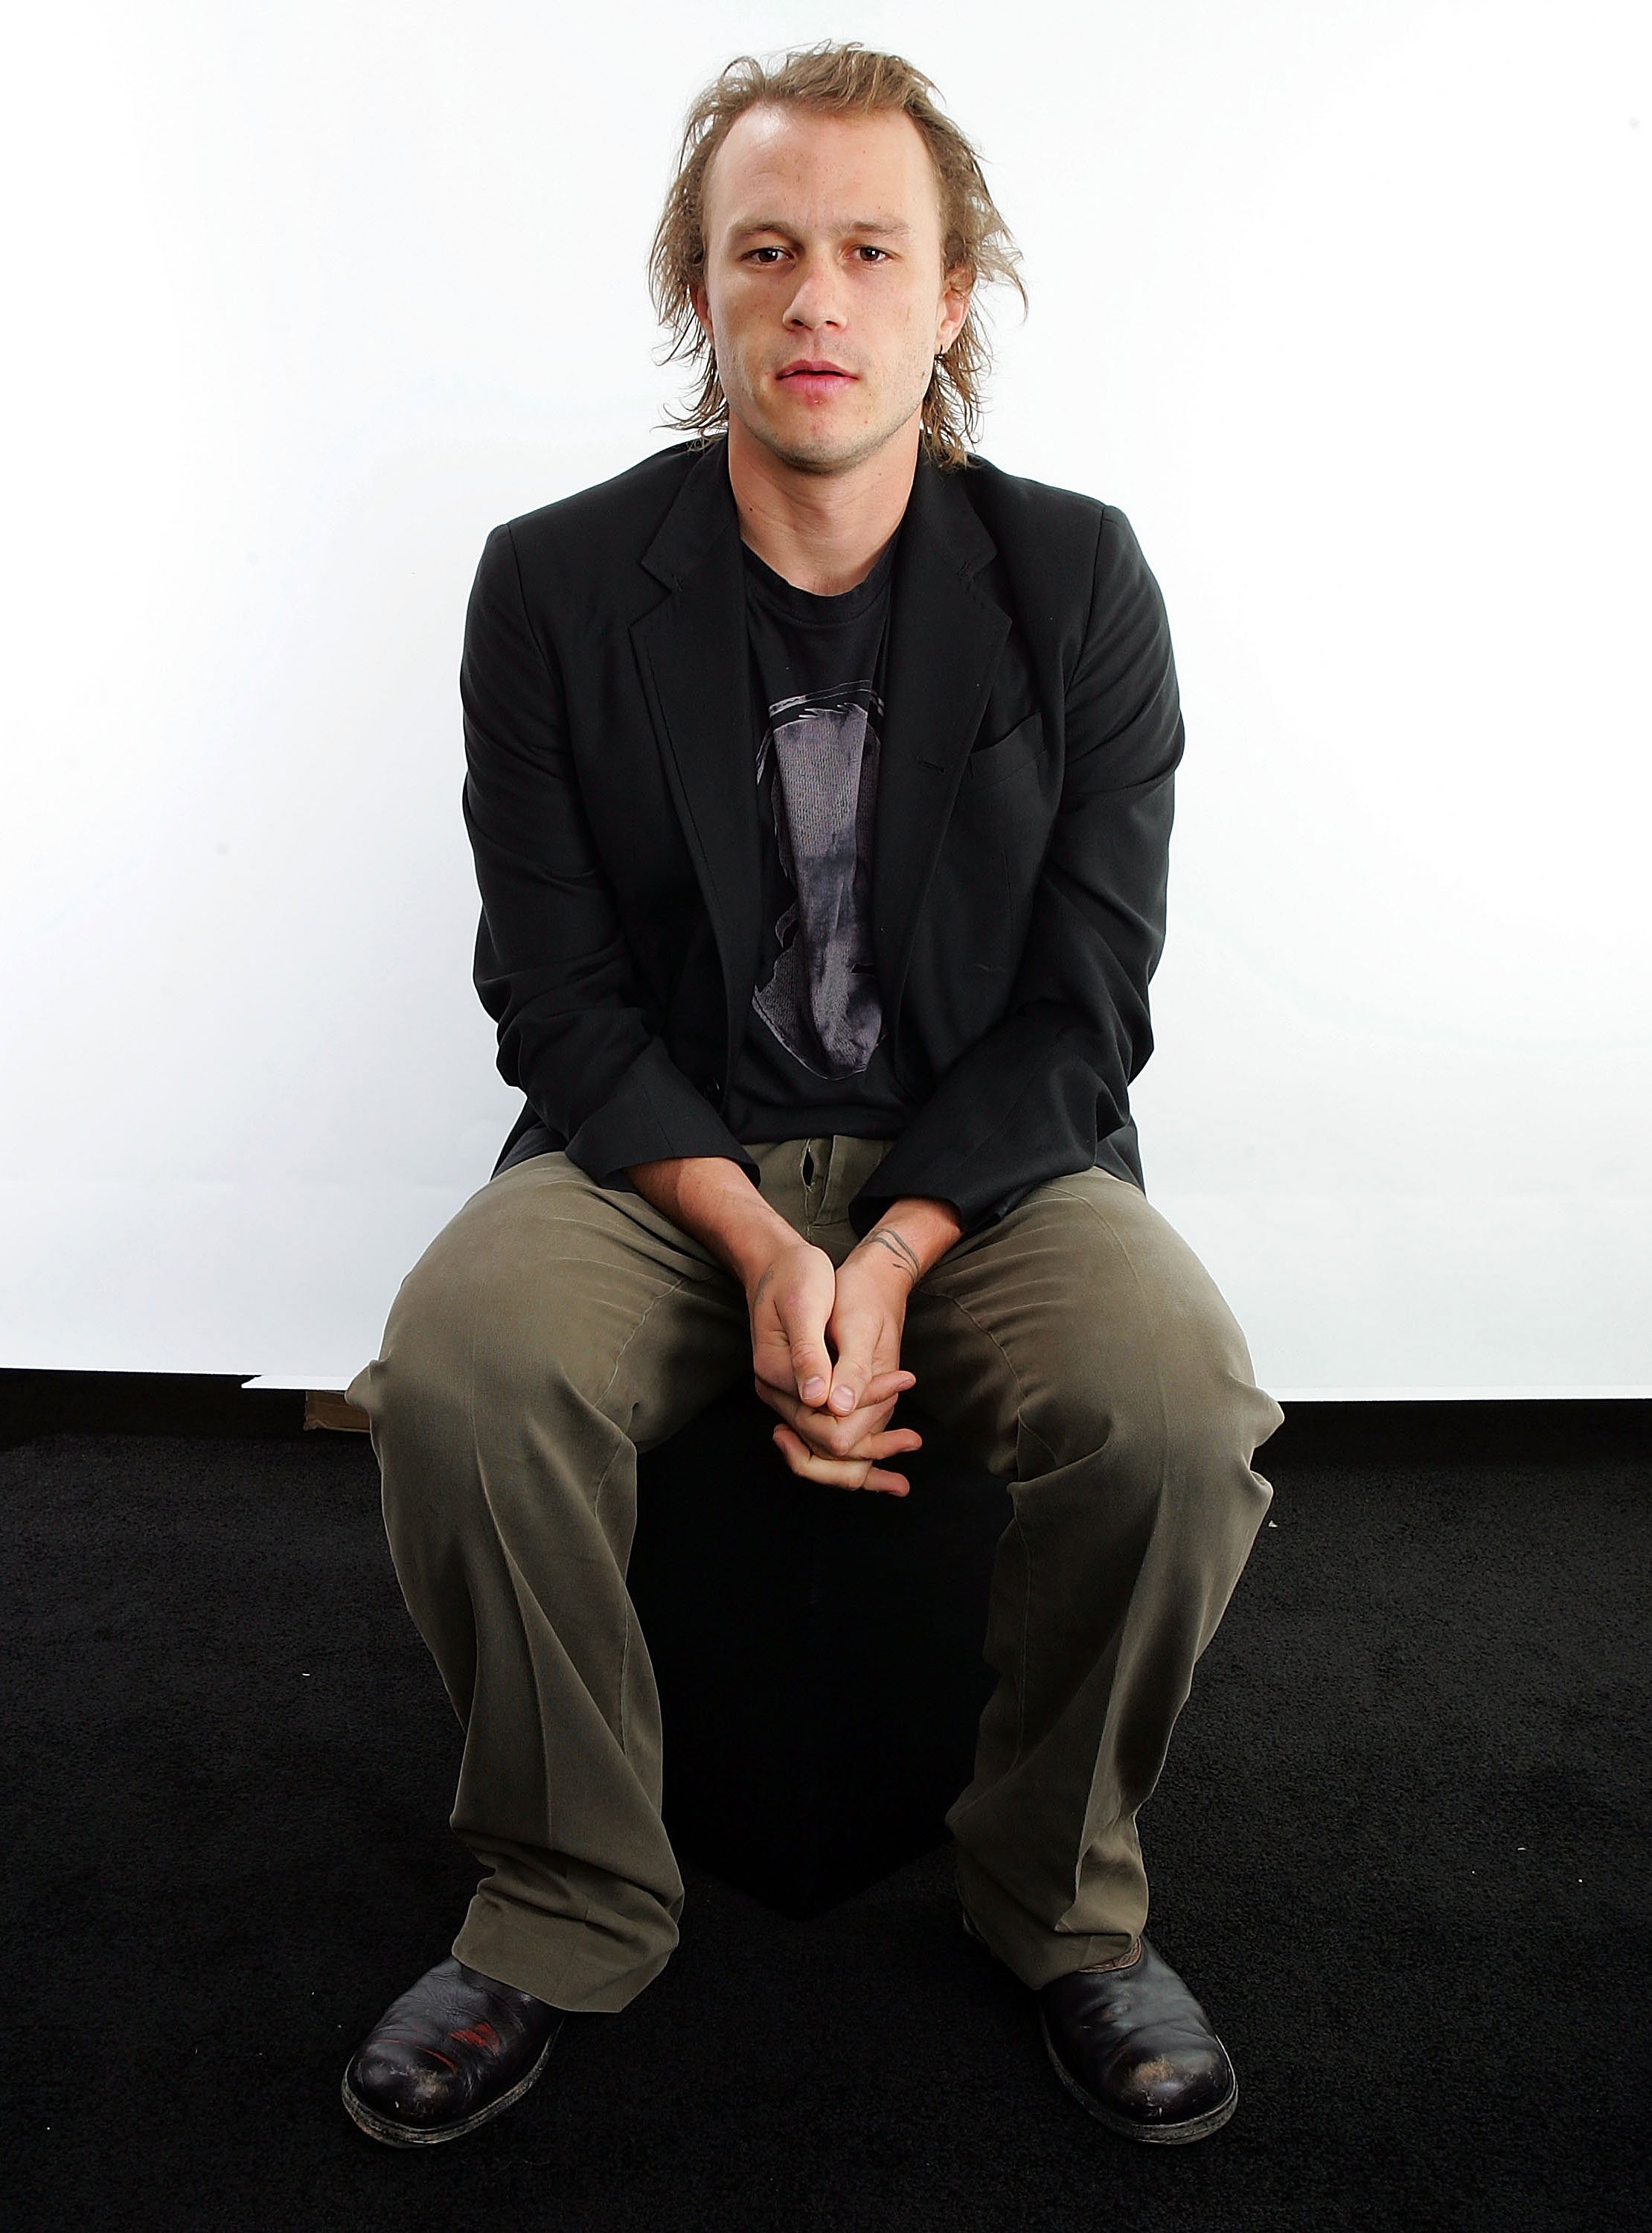 Heath Ledger posing for portraits in the Chanel Celebrity Suite at the Four Season hotel during the Toronto International Film Festival in Toronto, Canada | Photo: Getty Images